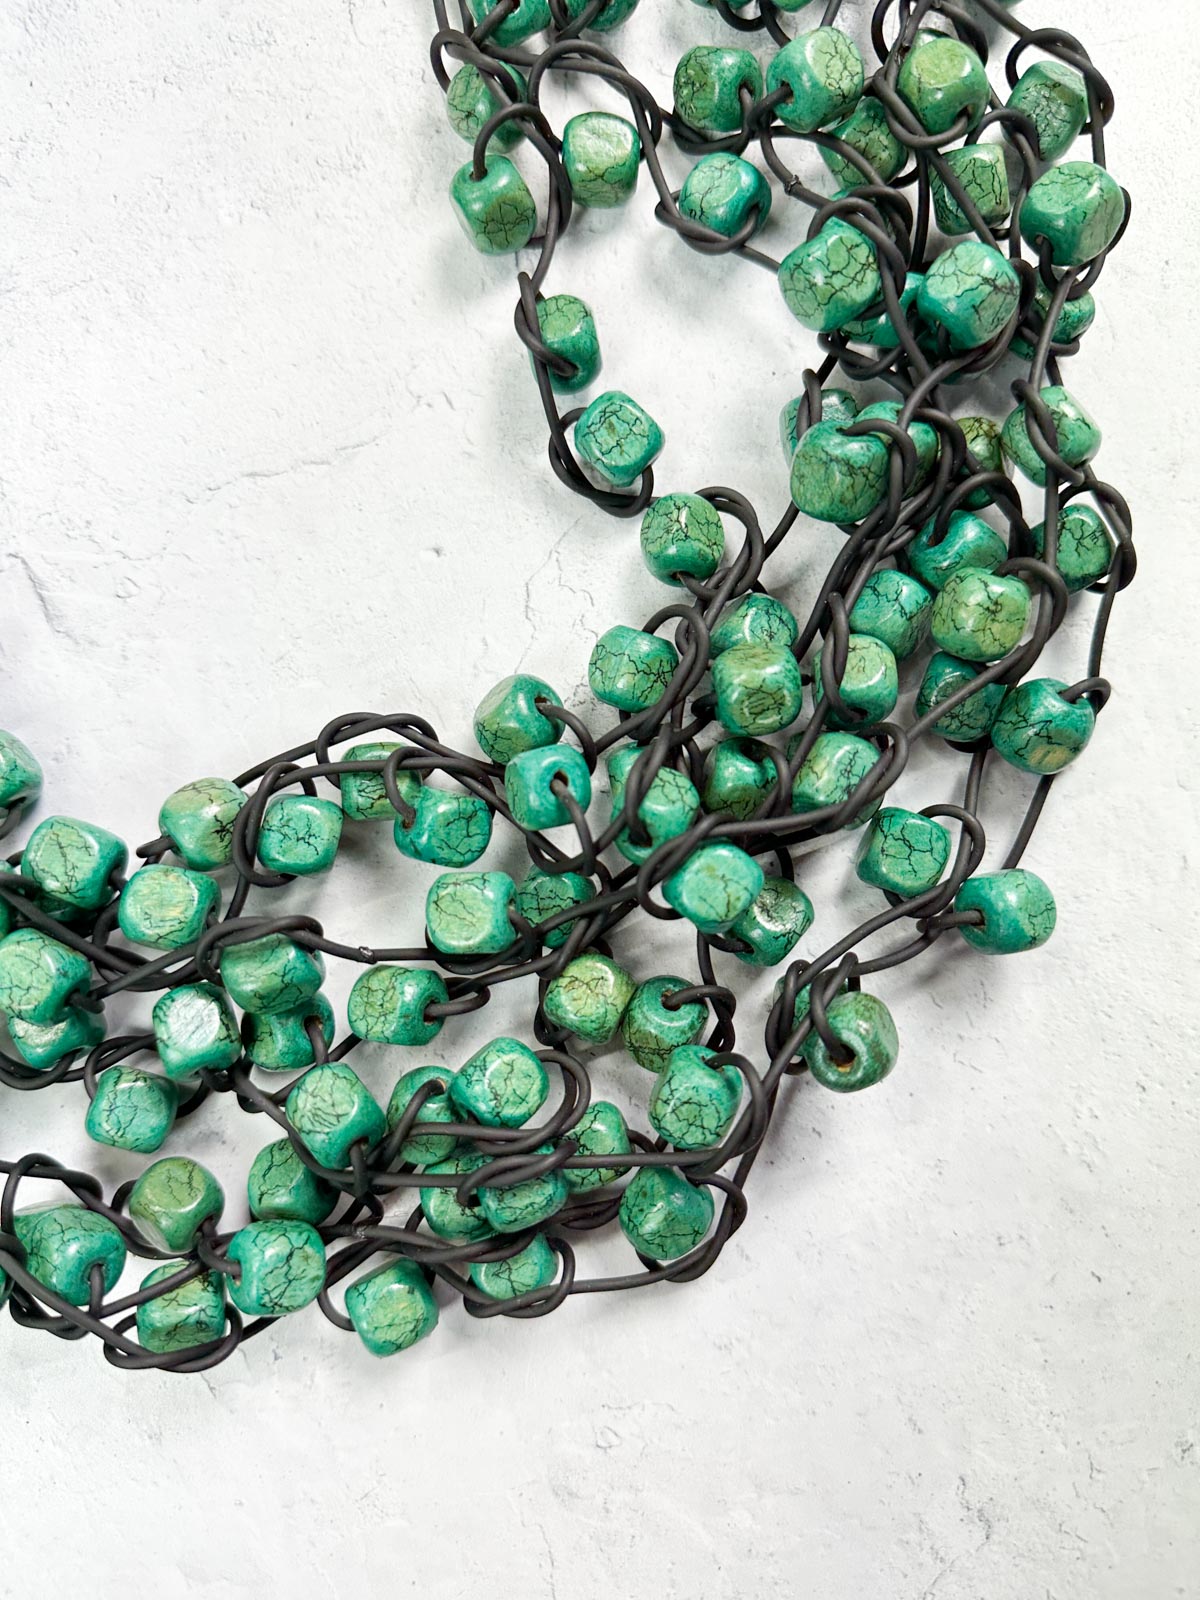 Emerald Green Necklace, Green Gemstone Chunky Necklace, Large Statement  Necklace, Unique Bohemian Necklace, Boho Leather Bib Necklace - Etsy |  Stone statement necklace, Green stone necklace, Big pendant necklace